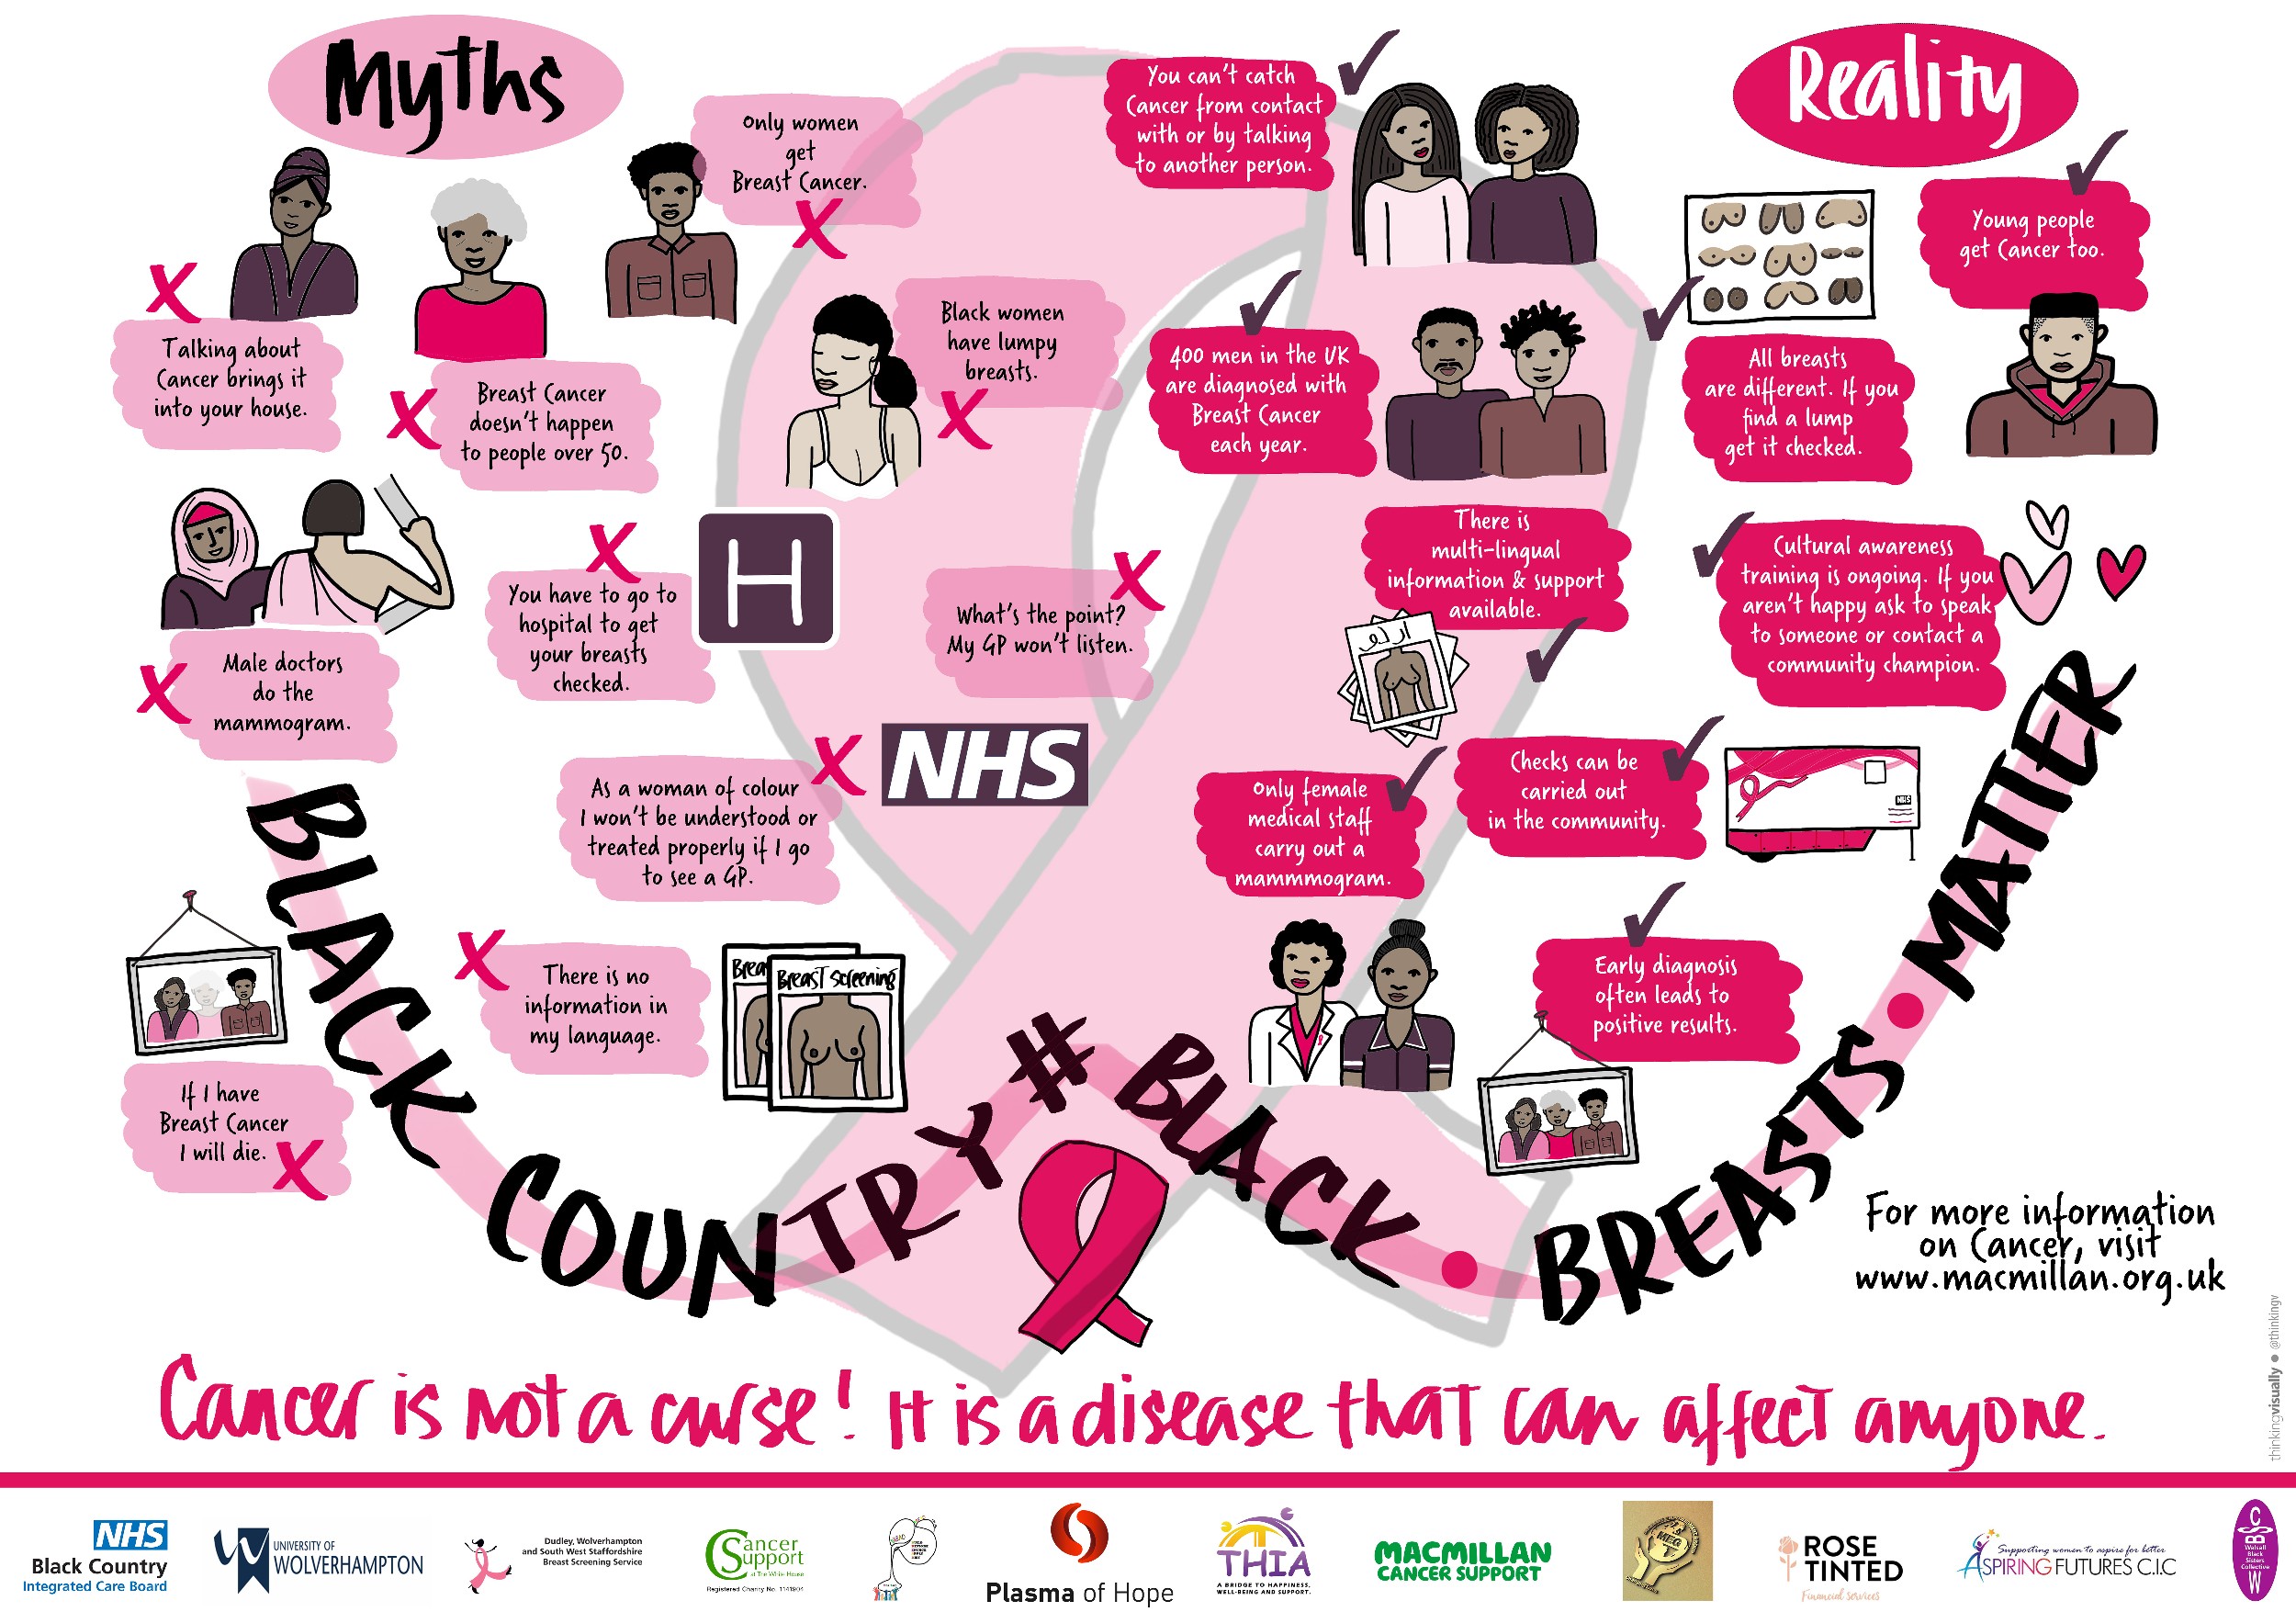 Myths and facts about Breast Cancer for black, African and Caribbean. Click the image to download a pdf version.